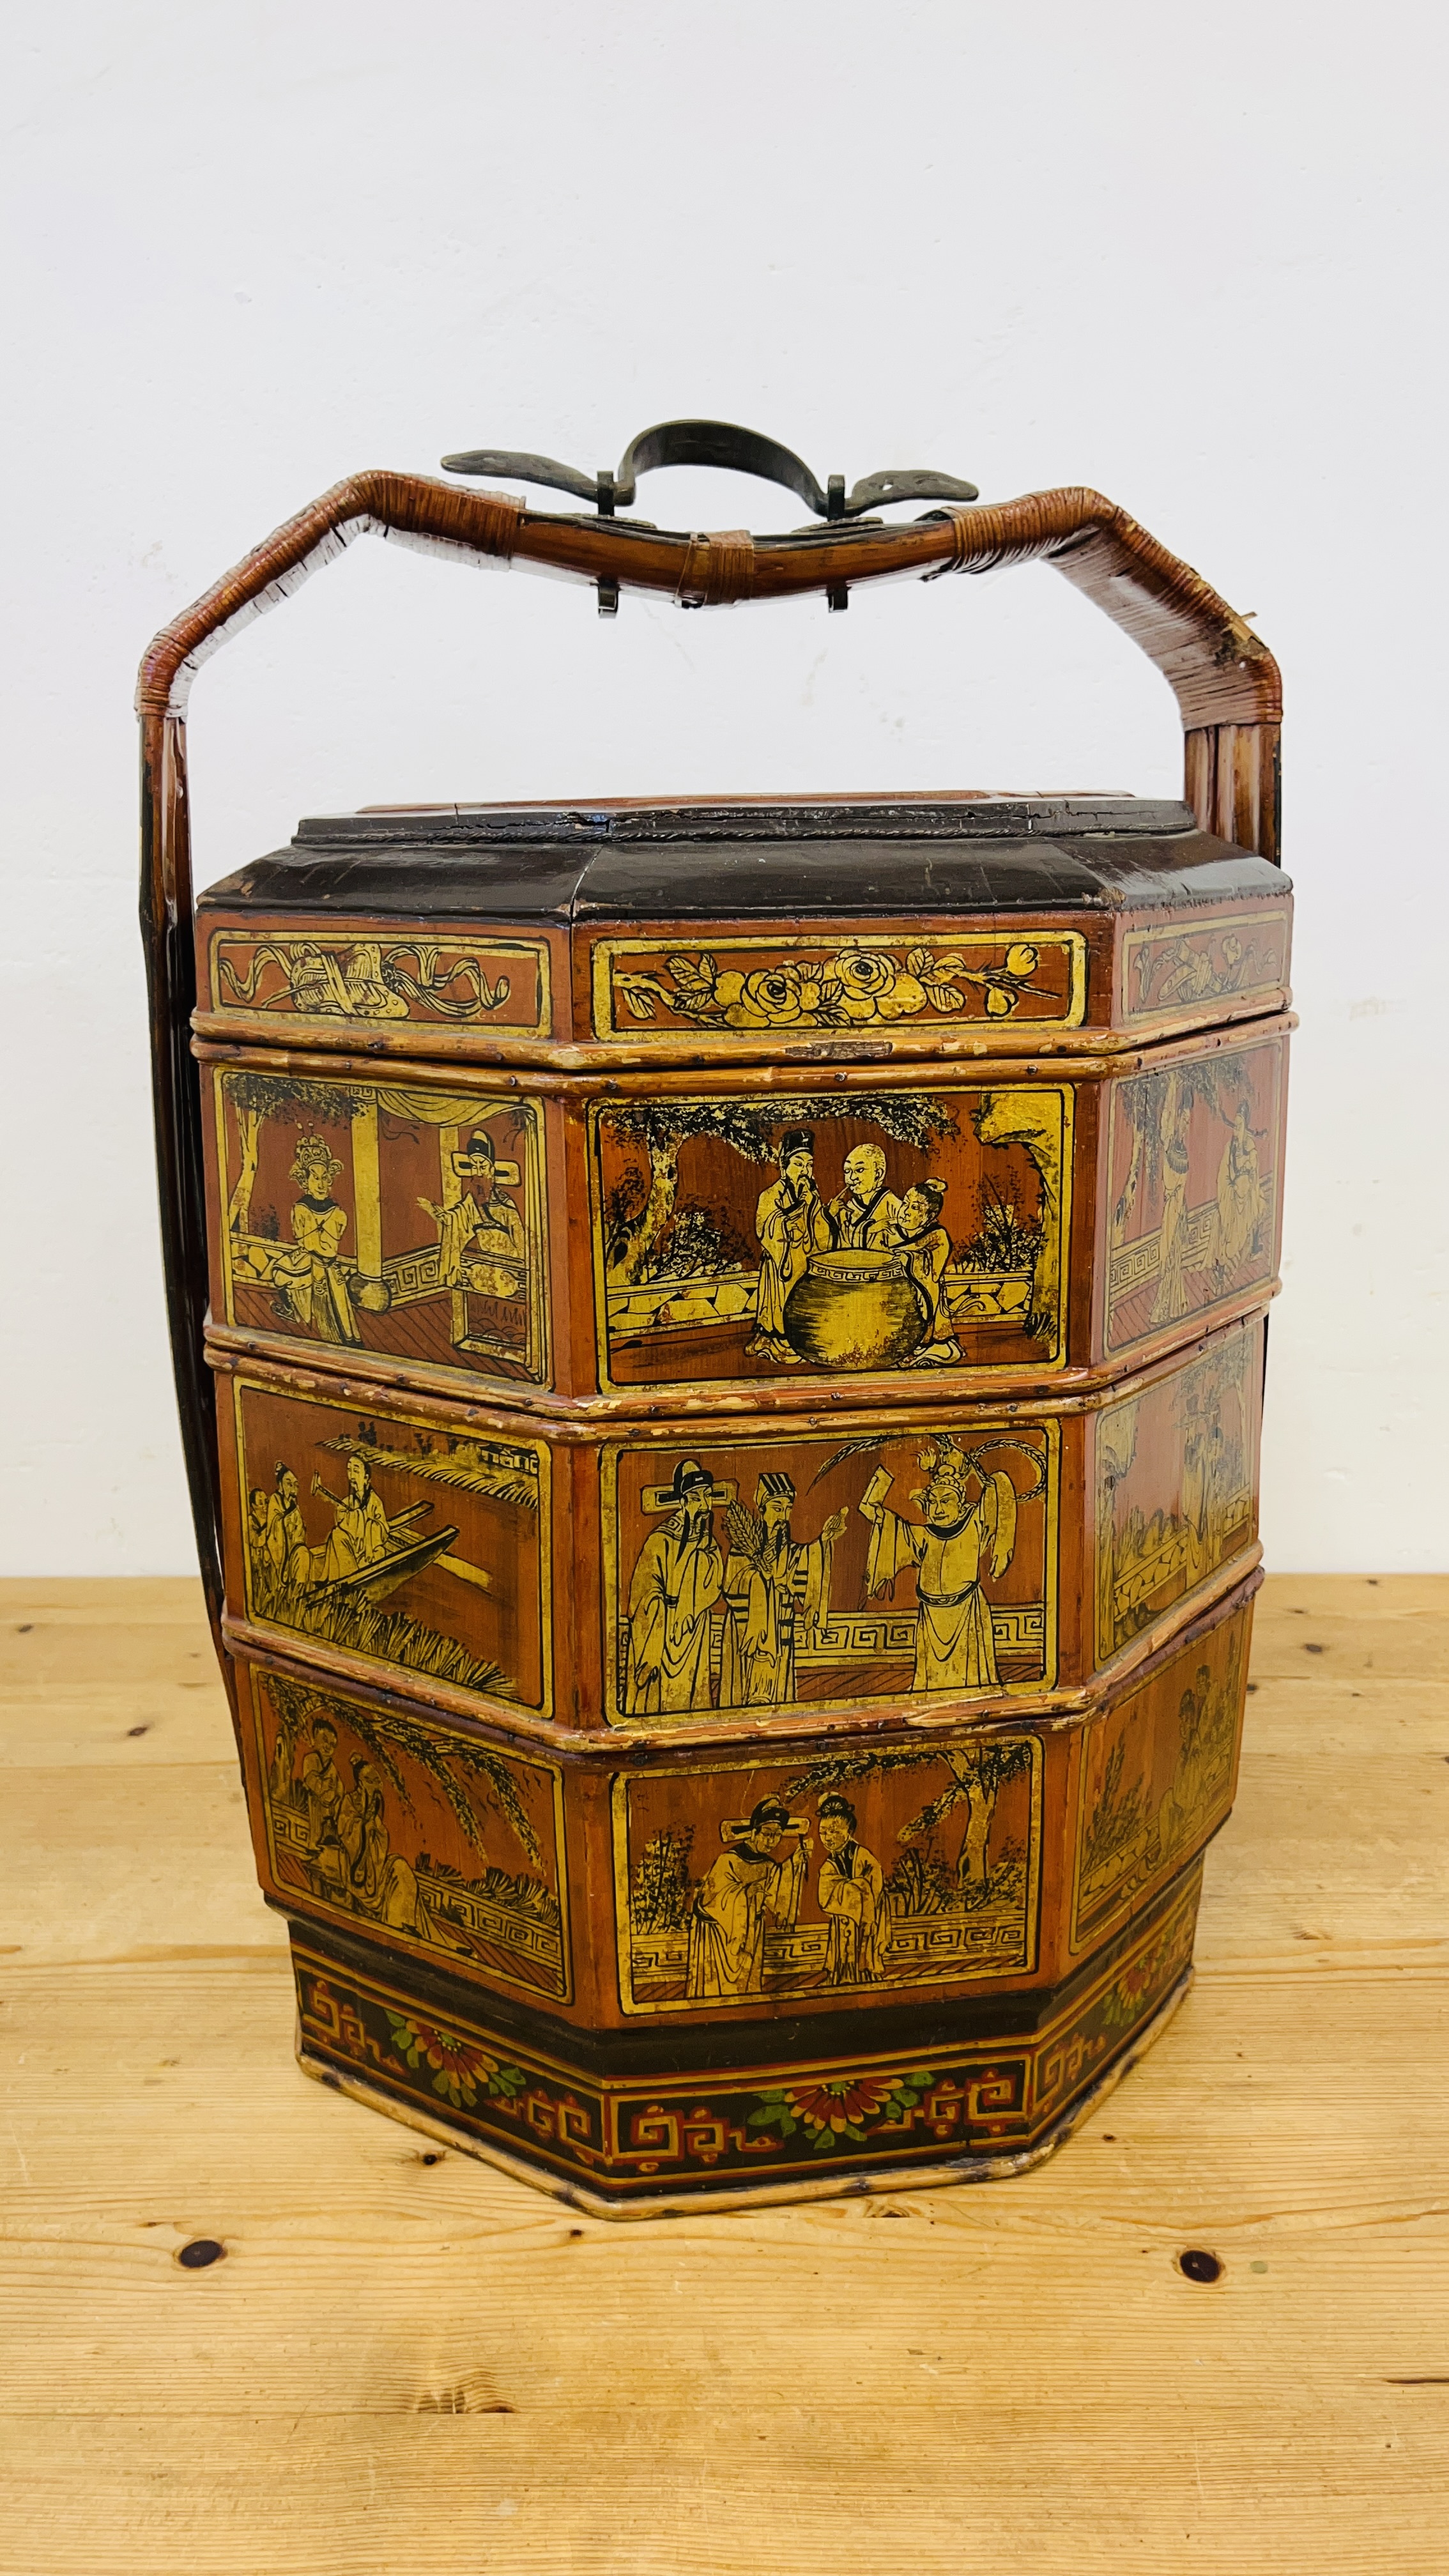 A HIGHLY DECORATIVE GILT DECORATED AND LACQUERED CHINESE WEDDING BASKET - HEIGHT 62CM. - Image 3 of 12